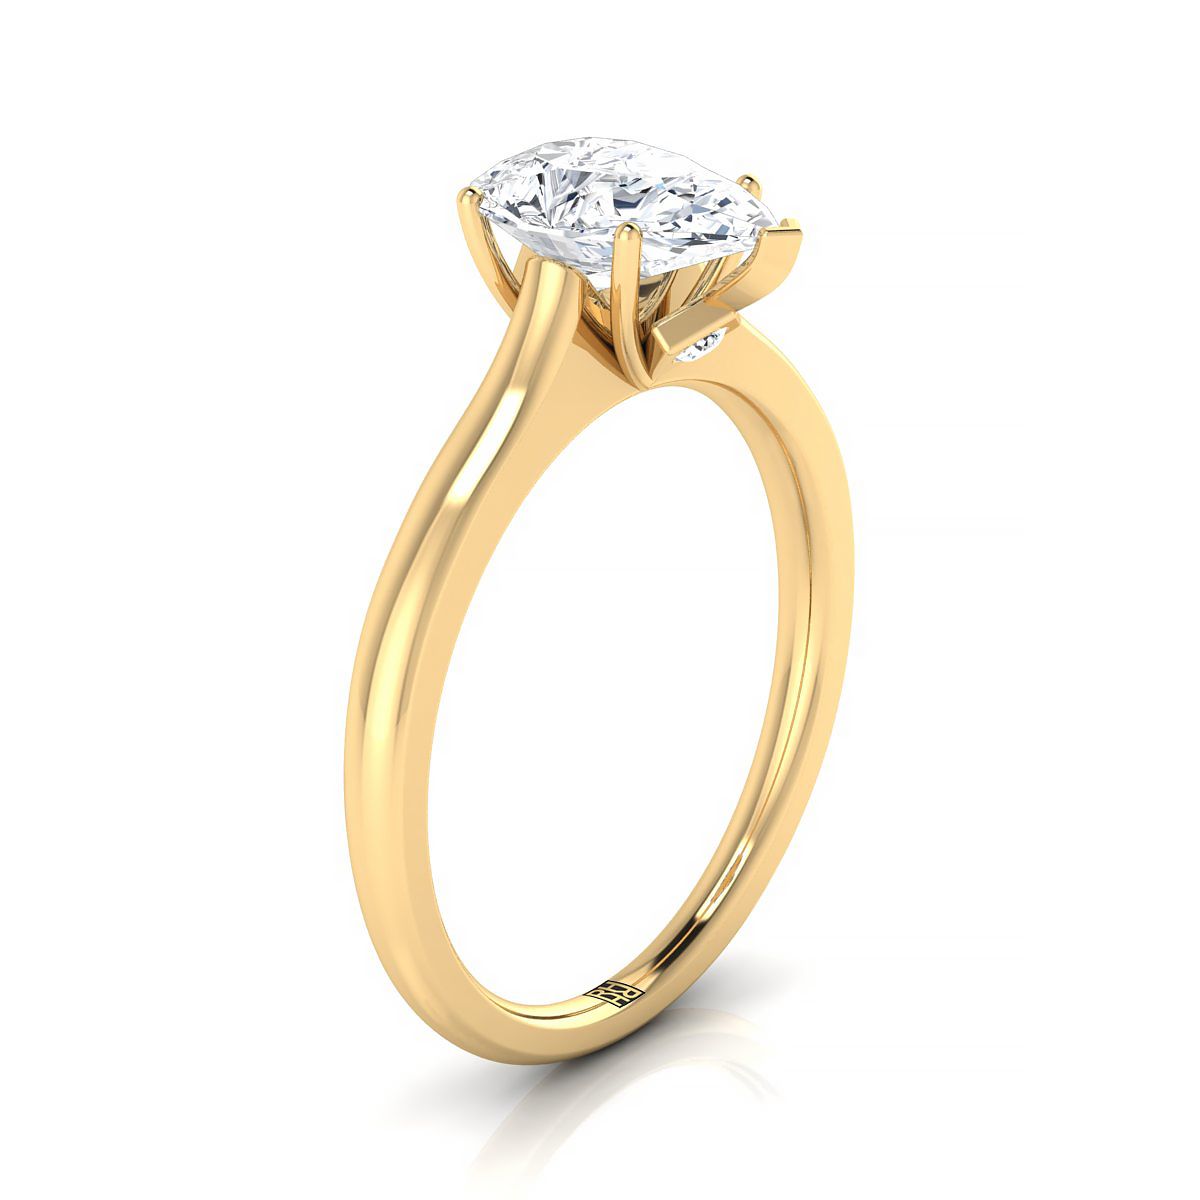 18K Yellow Gold Pear Shape Center Cathedral Solitaire Surprise Secret Stone Engagement Ring